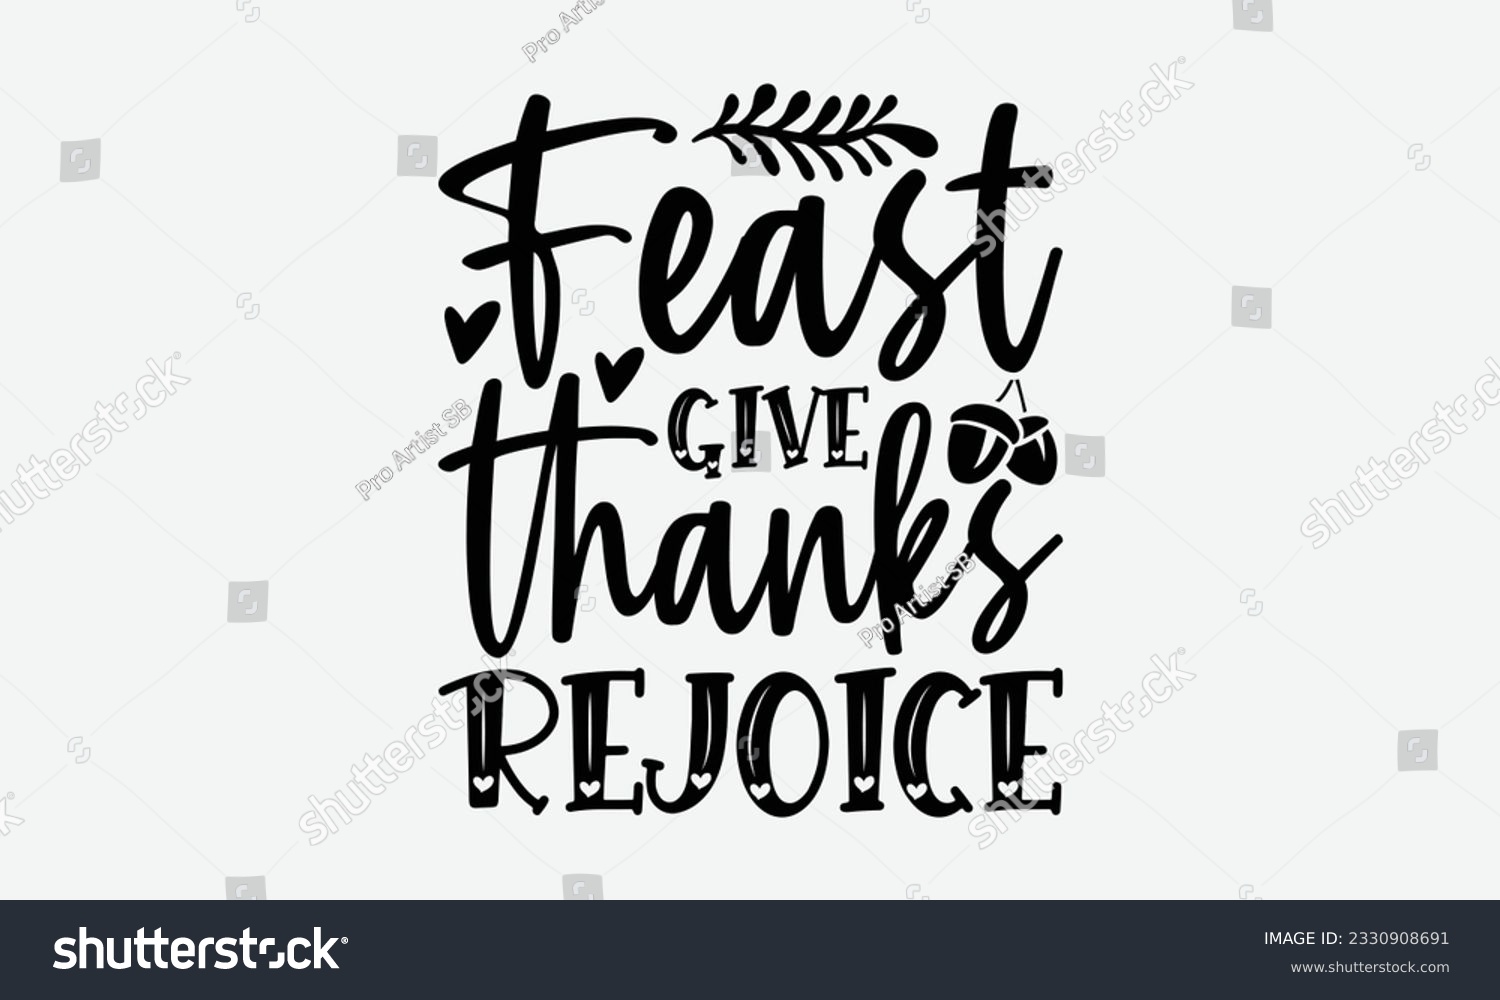 SVG of Feast Give Thanks Rejoice - Thanksgiving T-shirt Design Template, Thanksgiving Quotes File, Hand Drawn Lettering Phrase, SVG Files for Cutting Cricut and Silhouette. svg